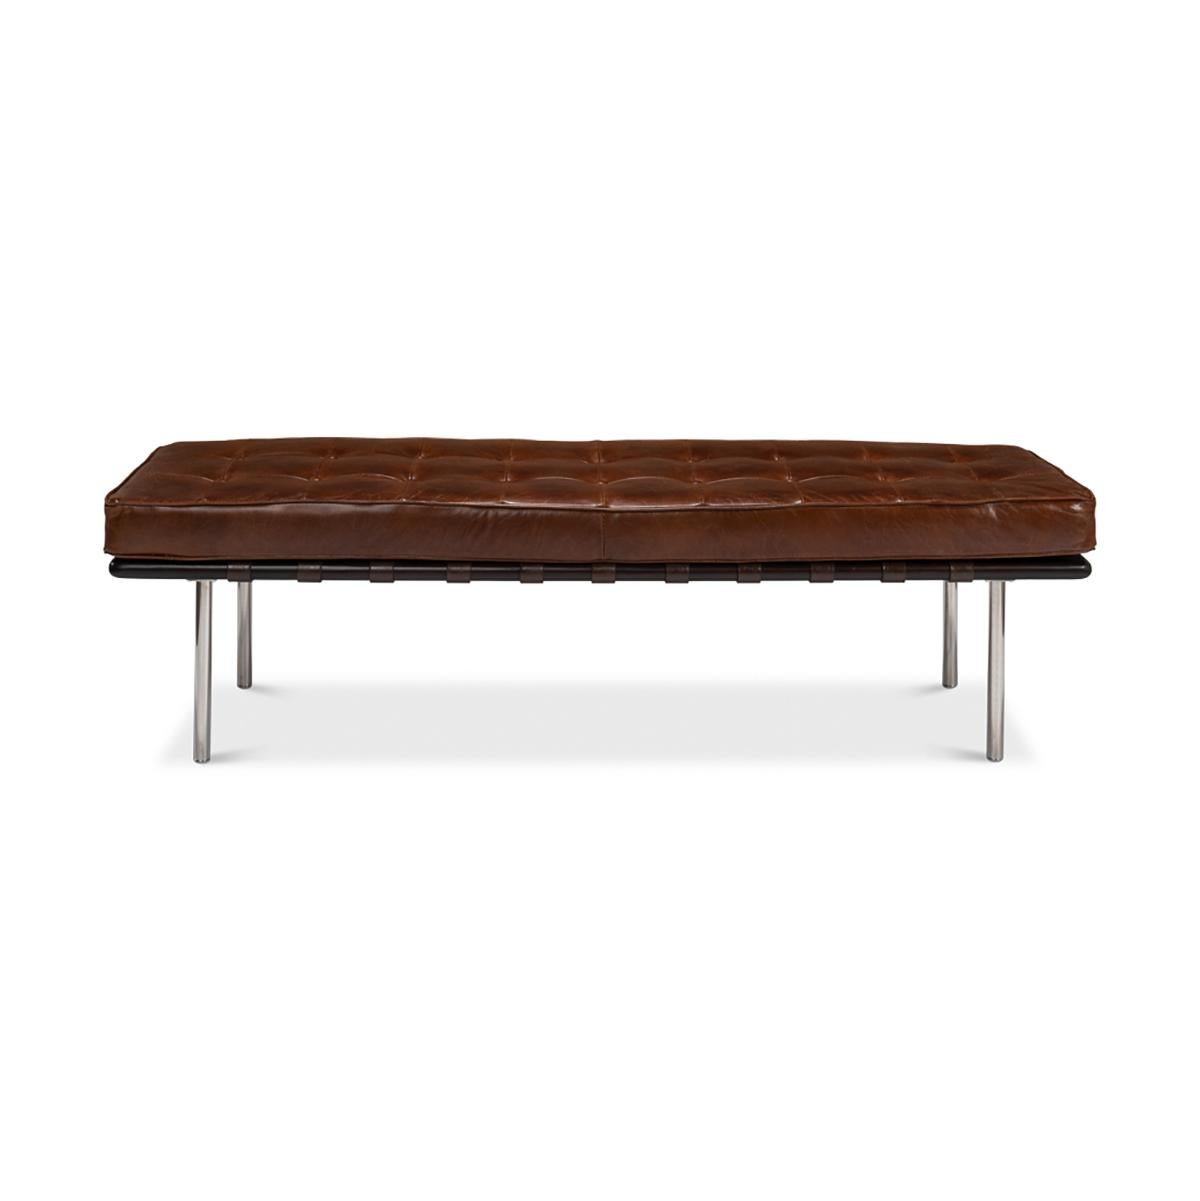 Mid century style leather bench with a top grain brown boxed and tufted leather cushion seat on a simple stainless steel four-leg base.

Dimensions: 64